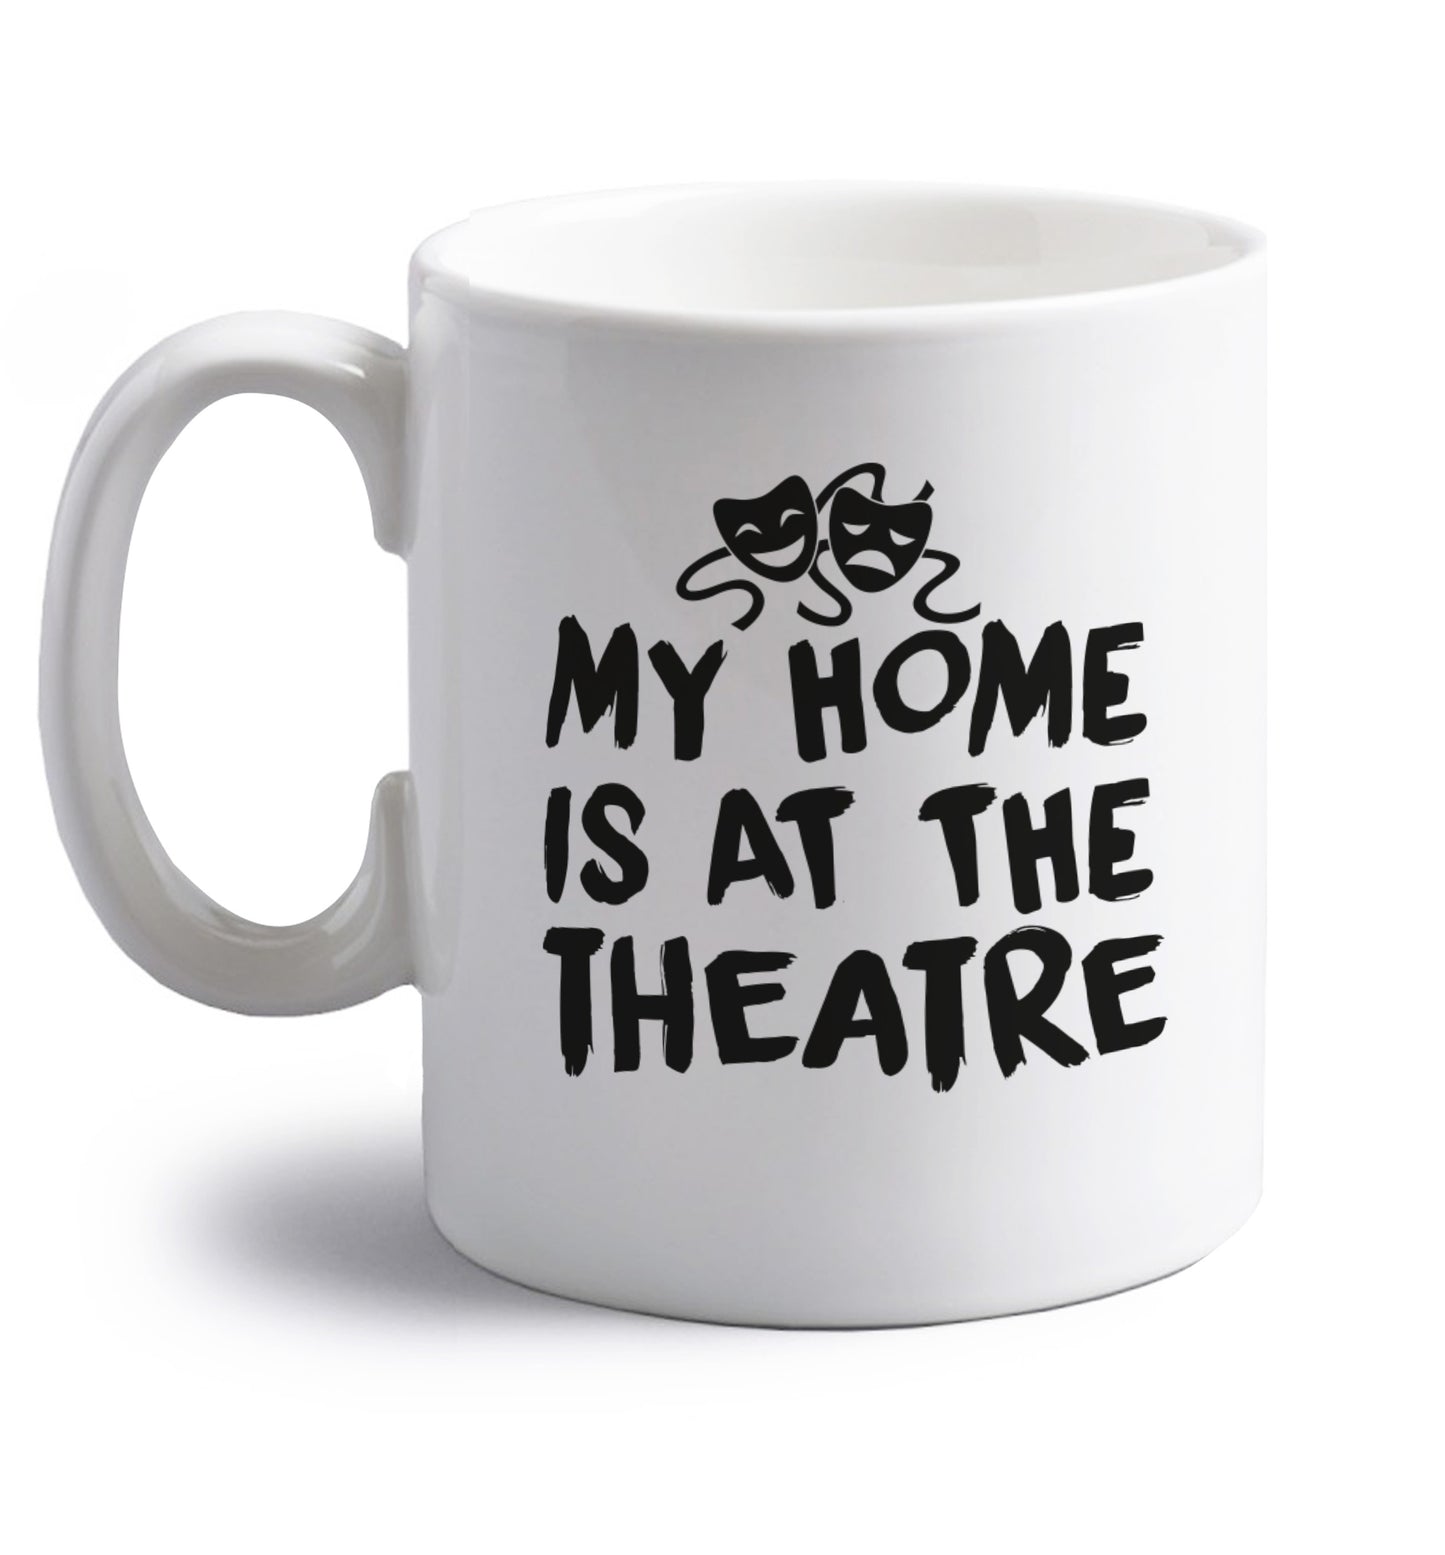 My home is at the theatre right handed white ceramic mug 